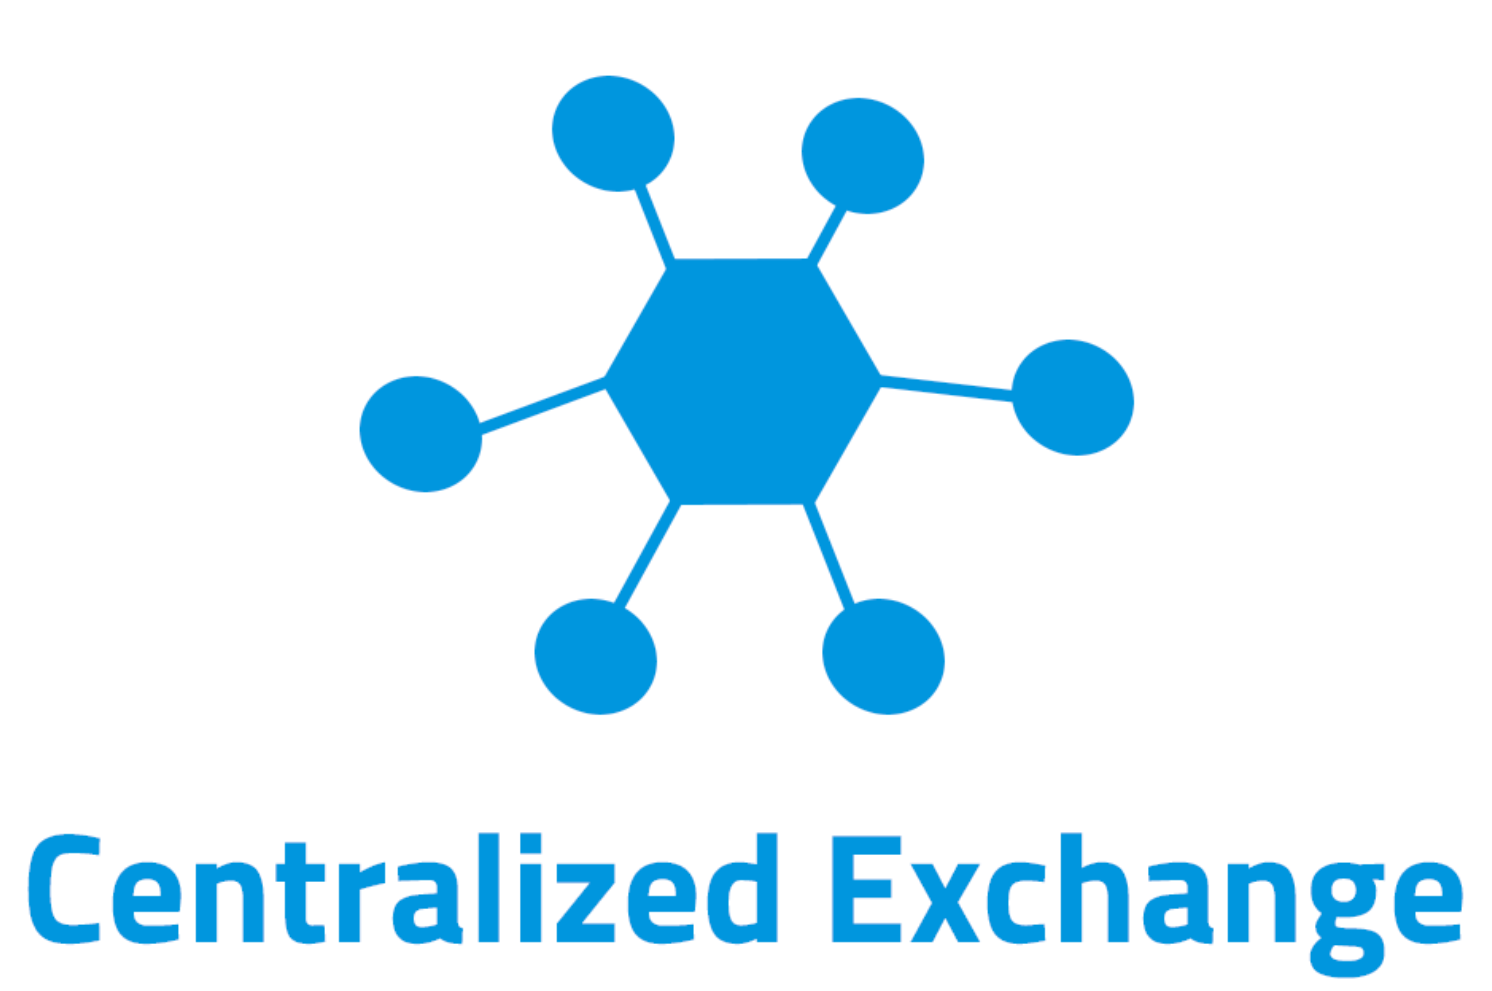 What is Centralized Exchange